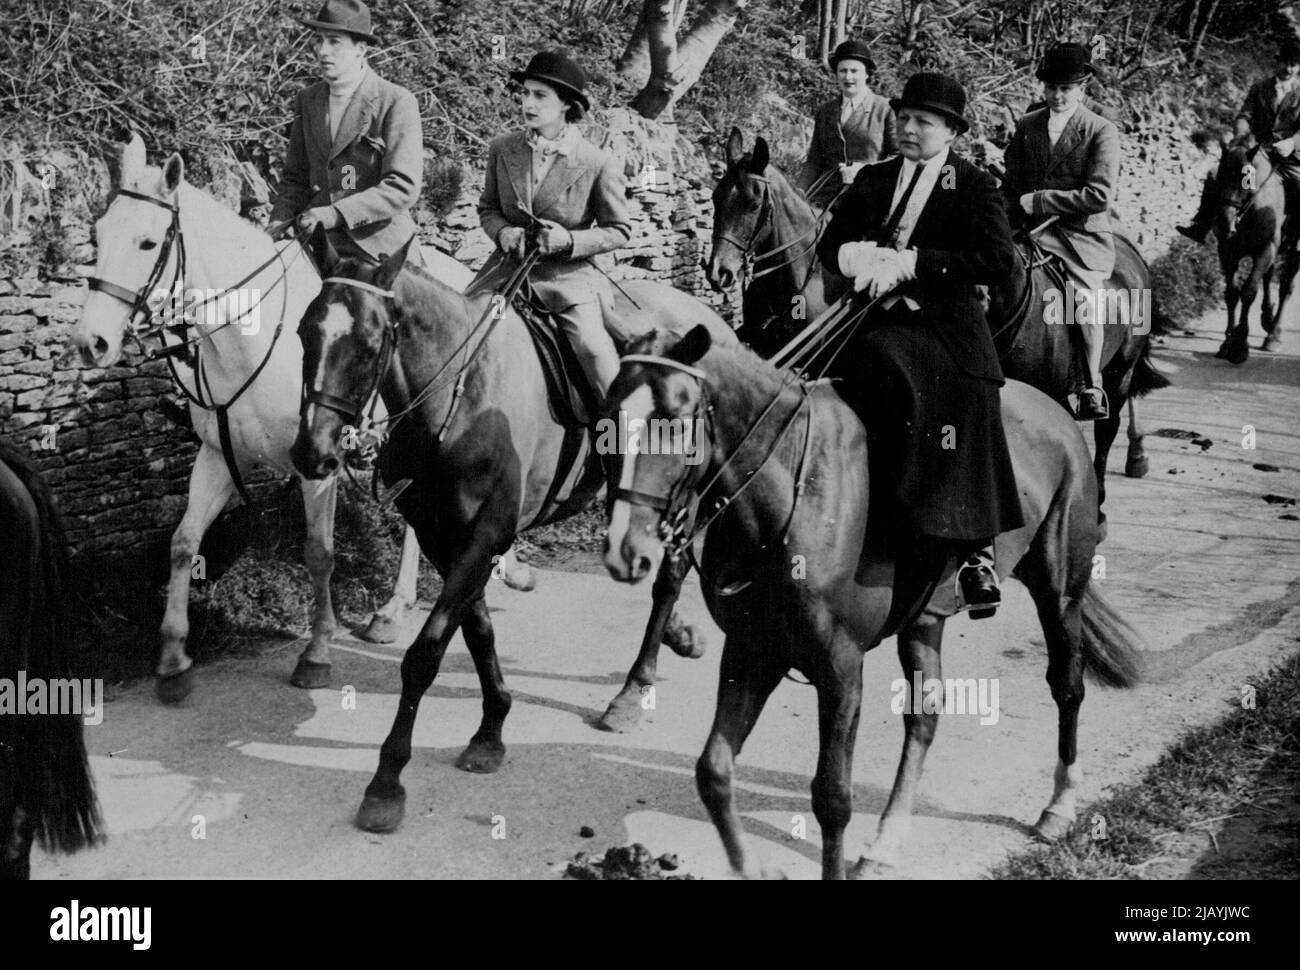 Princess Margaret Goes Hunting -- Princess Margaret, 18-year-old younger daughter of their Majesties King George and Queen Elizabeth, went out hunting it is believed for the first time when she attended the meet of the Duke of Beaufort's Hounds at Tresham, Gloucestershire. In this picture Princess Margaret (centre) is seen riding with the Duchess of Beaufort (right) at the meet. March 30, 1949. (Photo by Reuterphoto). Stock Photo